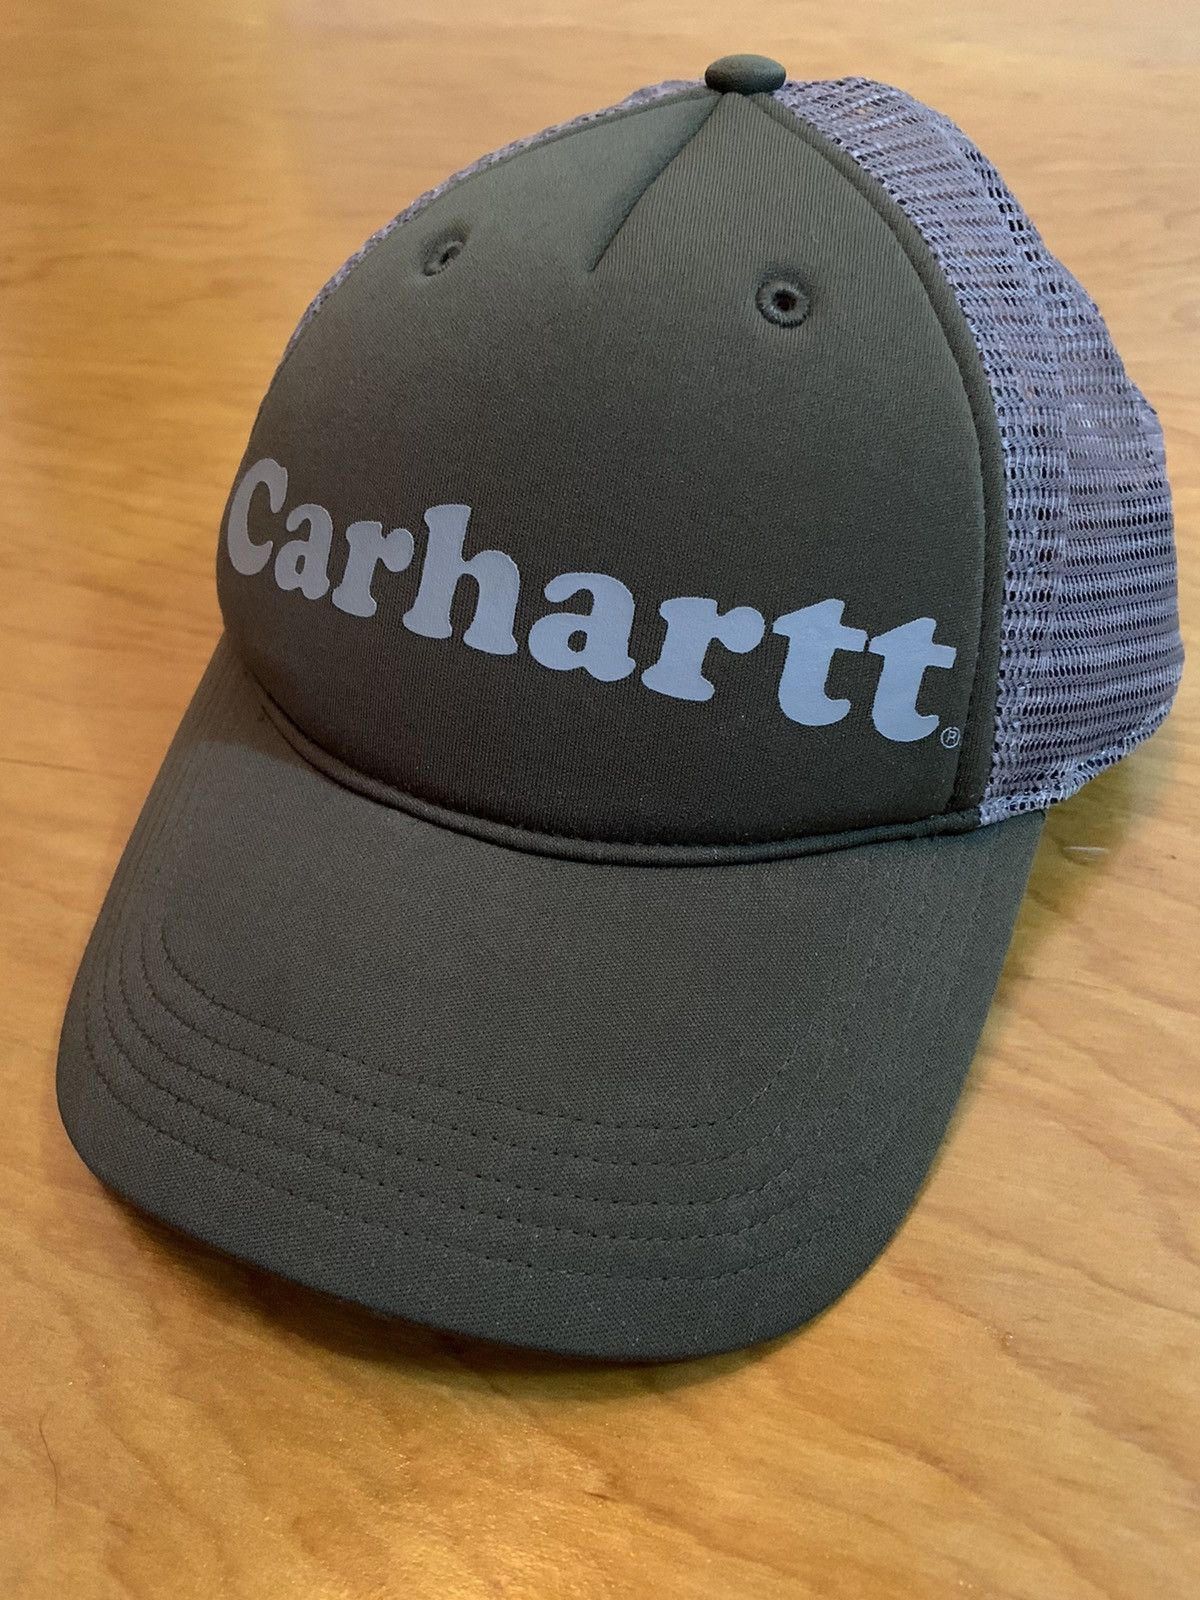 Carhartt Rare Carhartt Spell Out Trucker Hat Low Profile Size ONE SIZE - 1 Preview